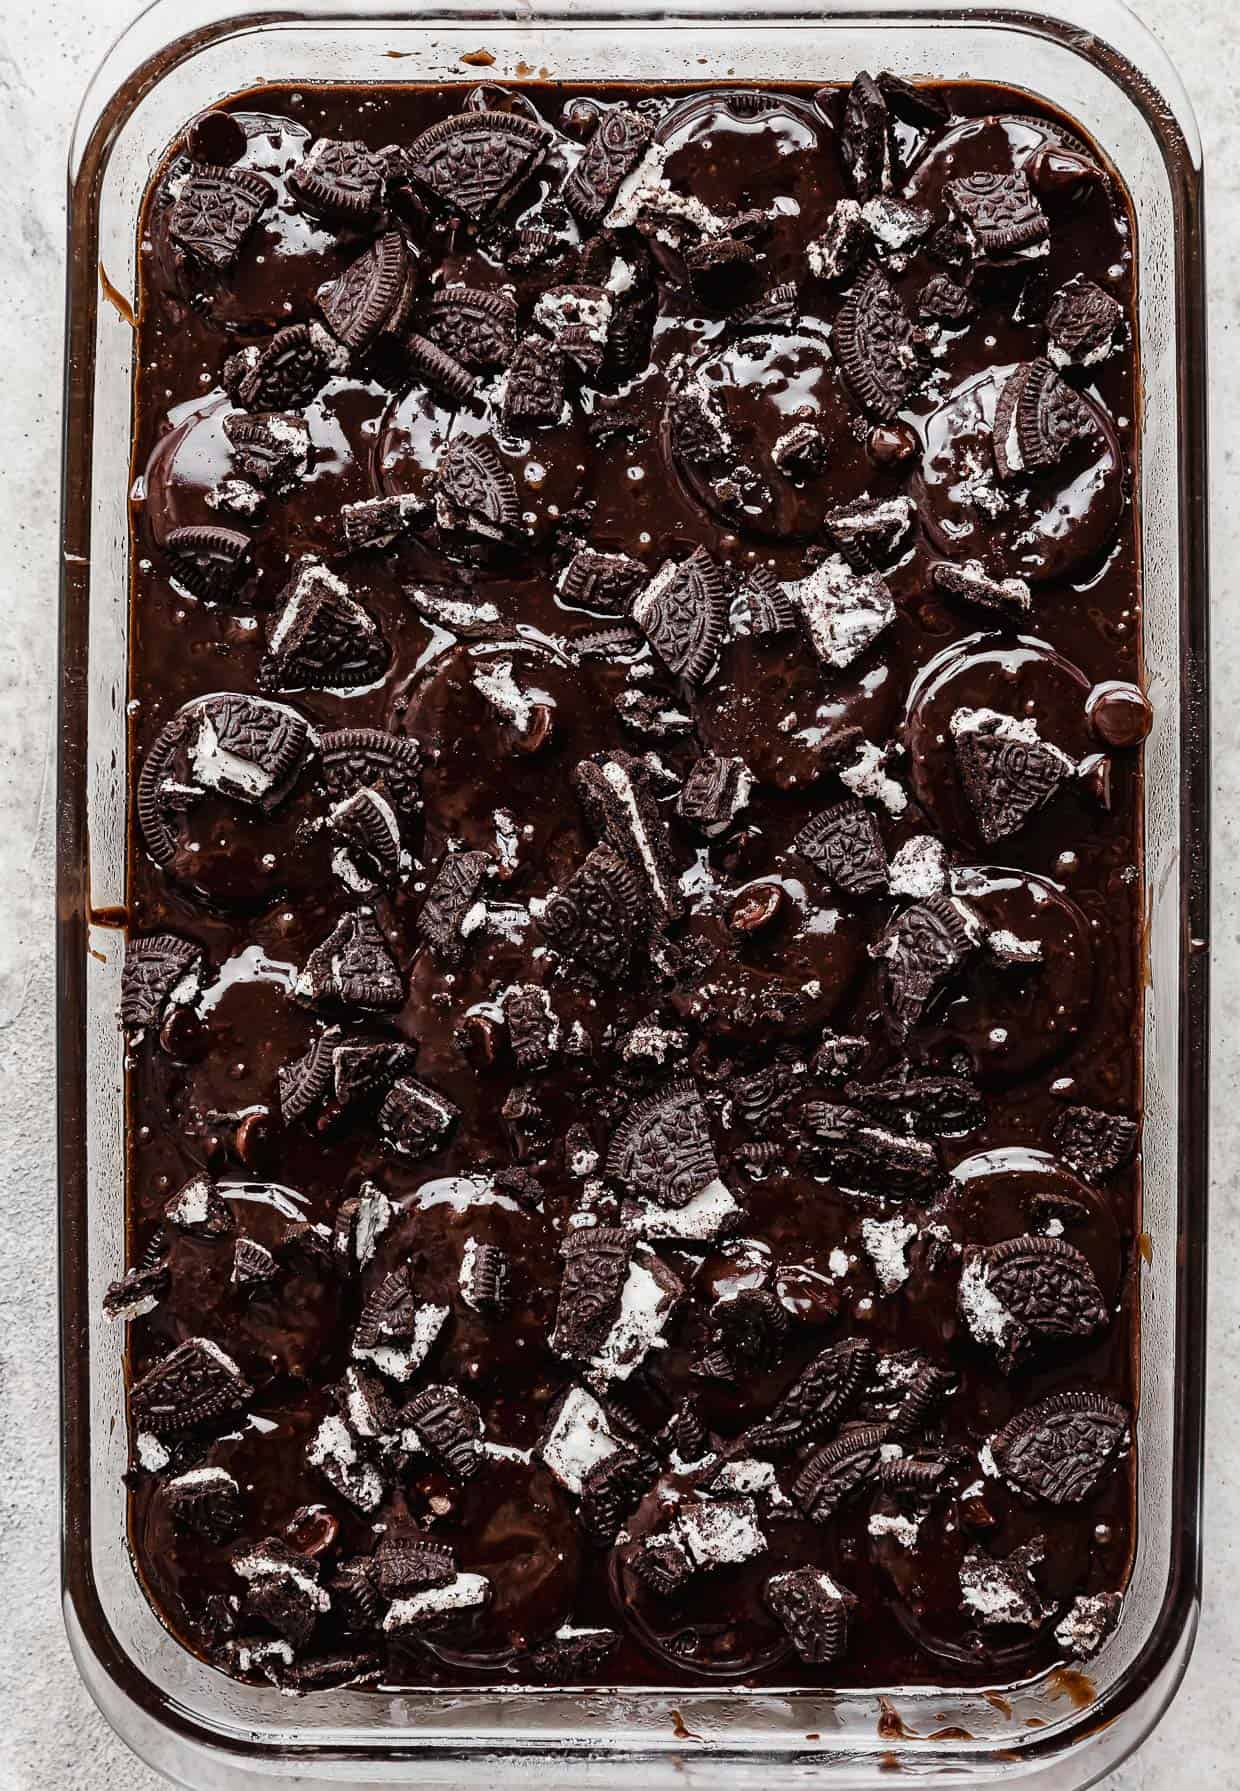 Chopped oreos sprinkled overtop brownie batter in a rectangle pan.